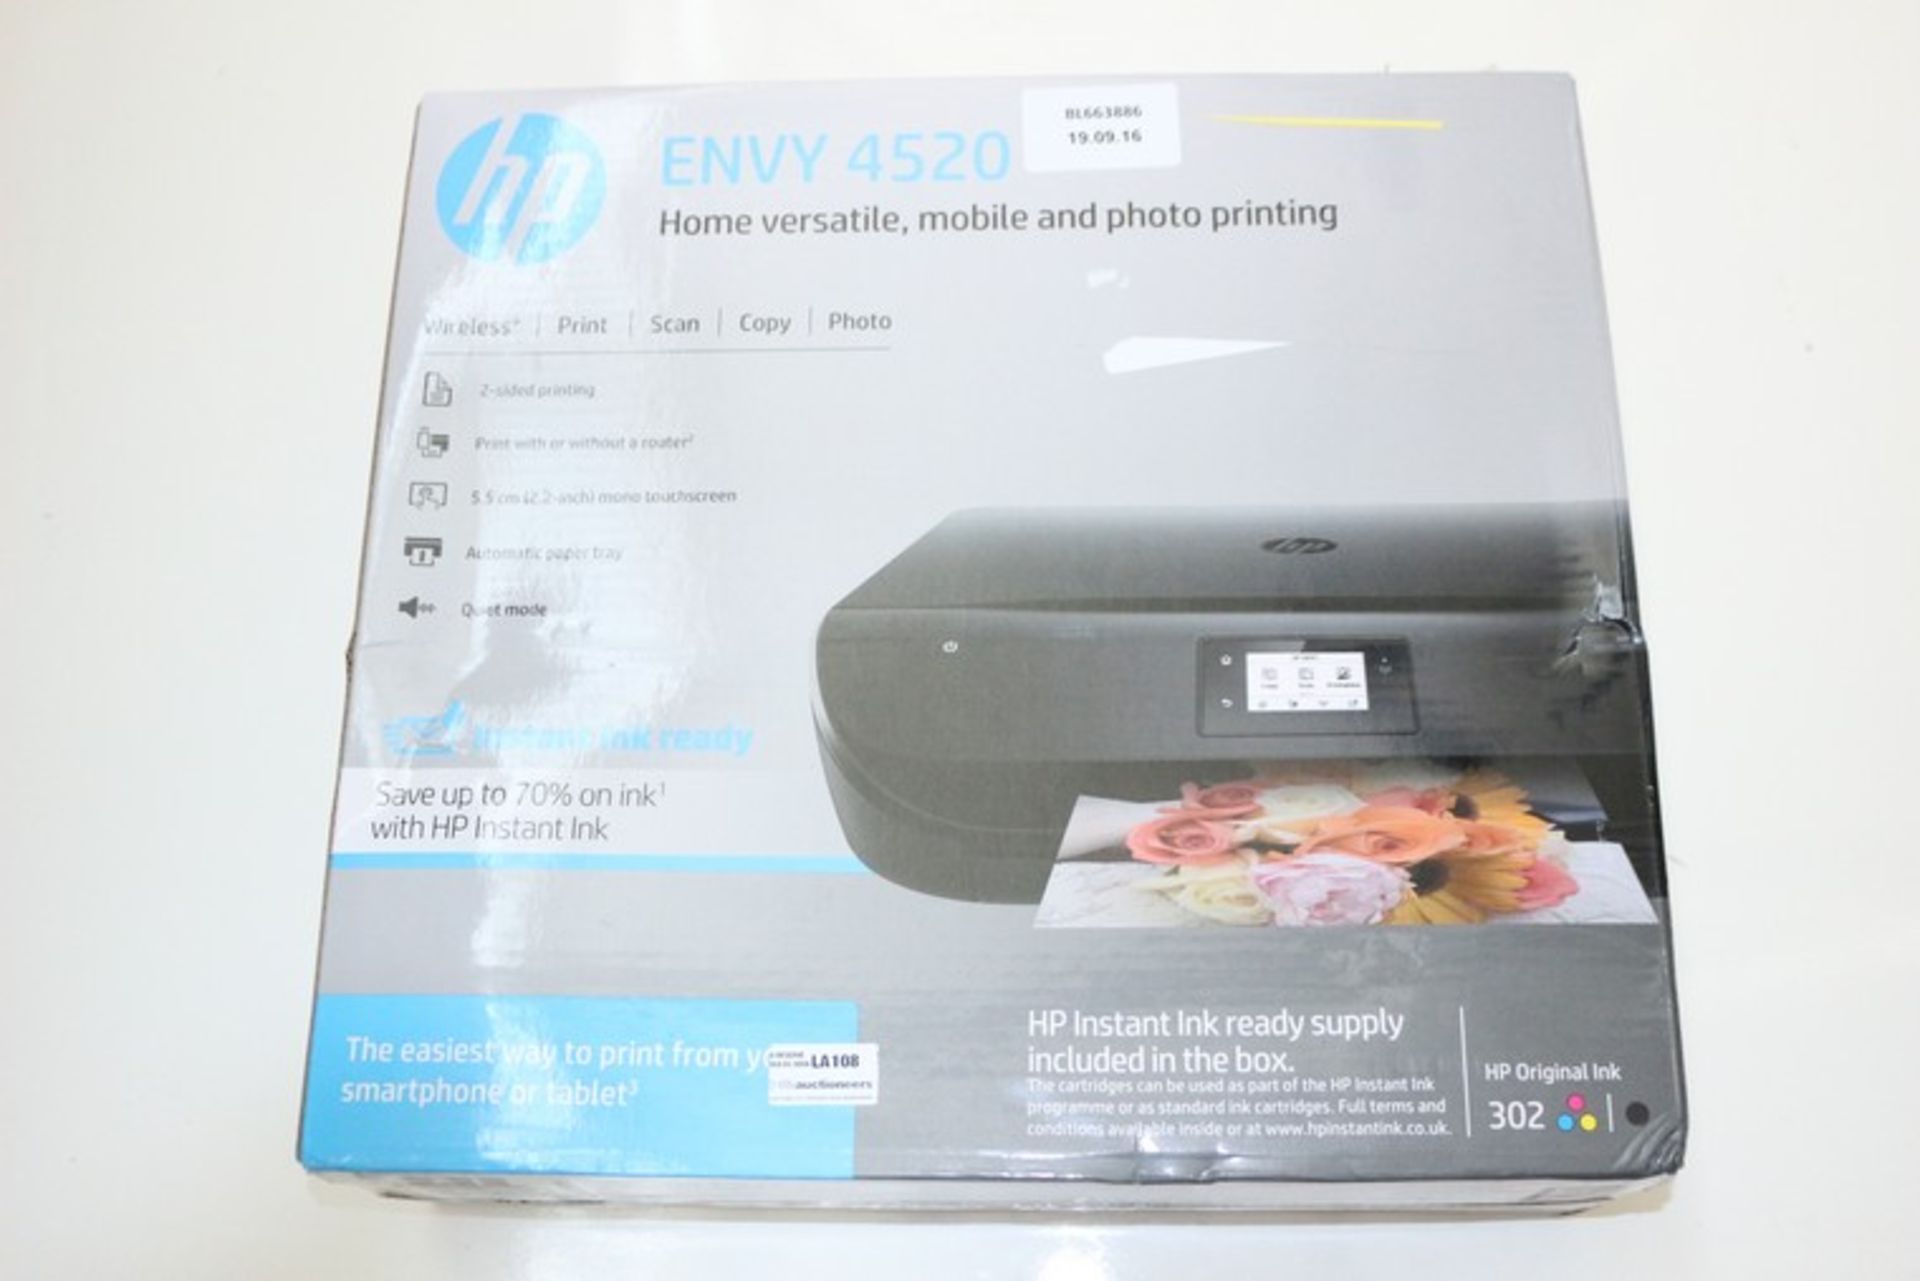 1 x BOXED HP ENVY 4520 ALL IN ONE PRINTER SCANNER COPIER RRP £70 *PLEASE NOTE THAT THE BID PRICE